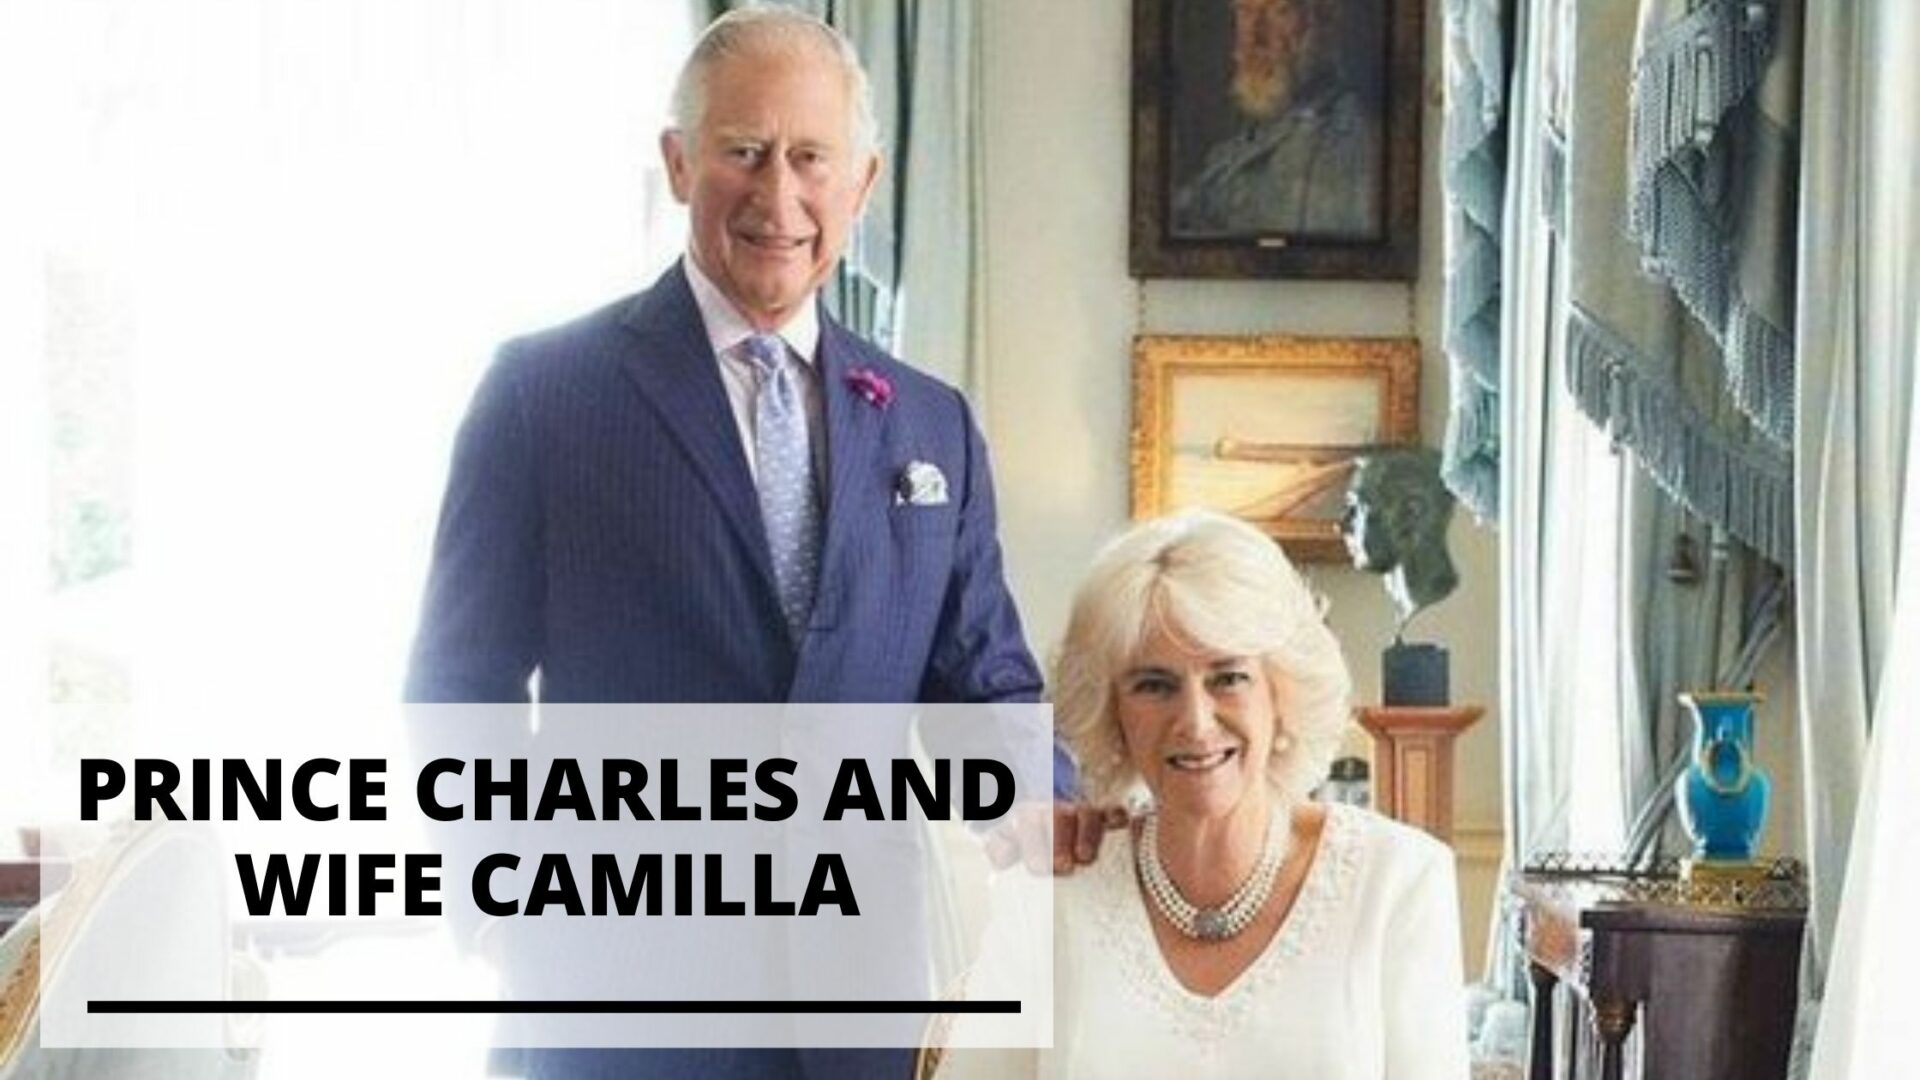 Prince Charles and Wife Camilla